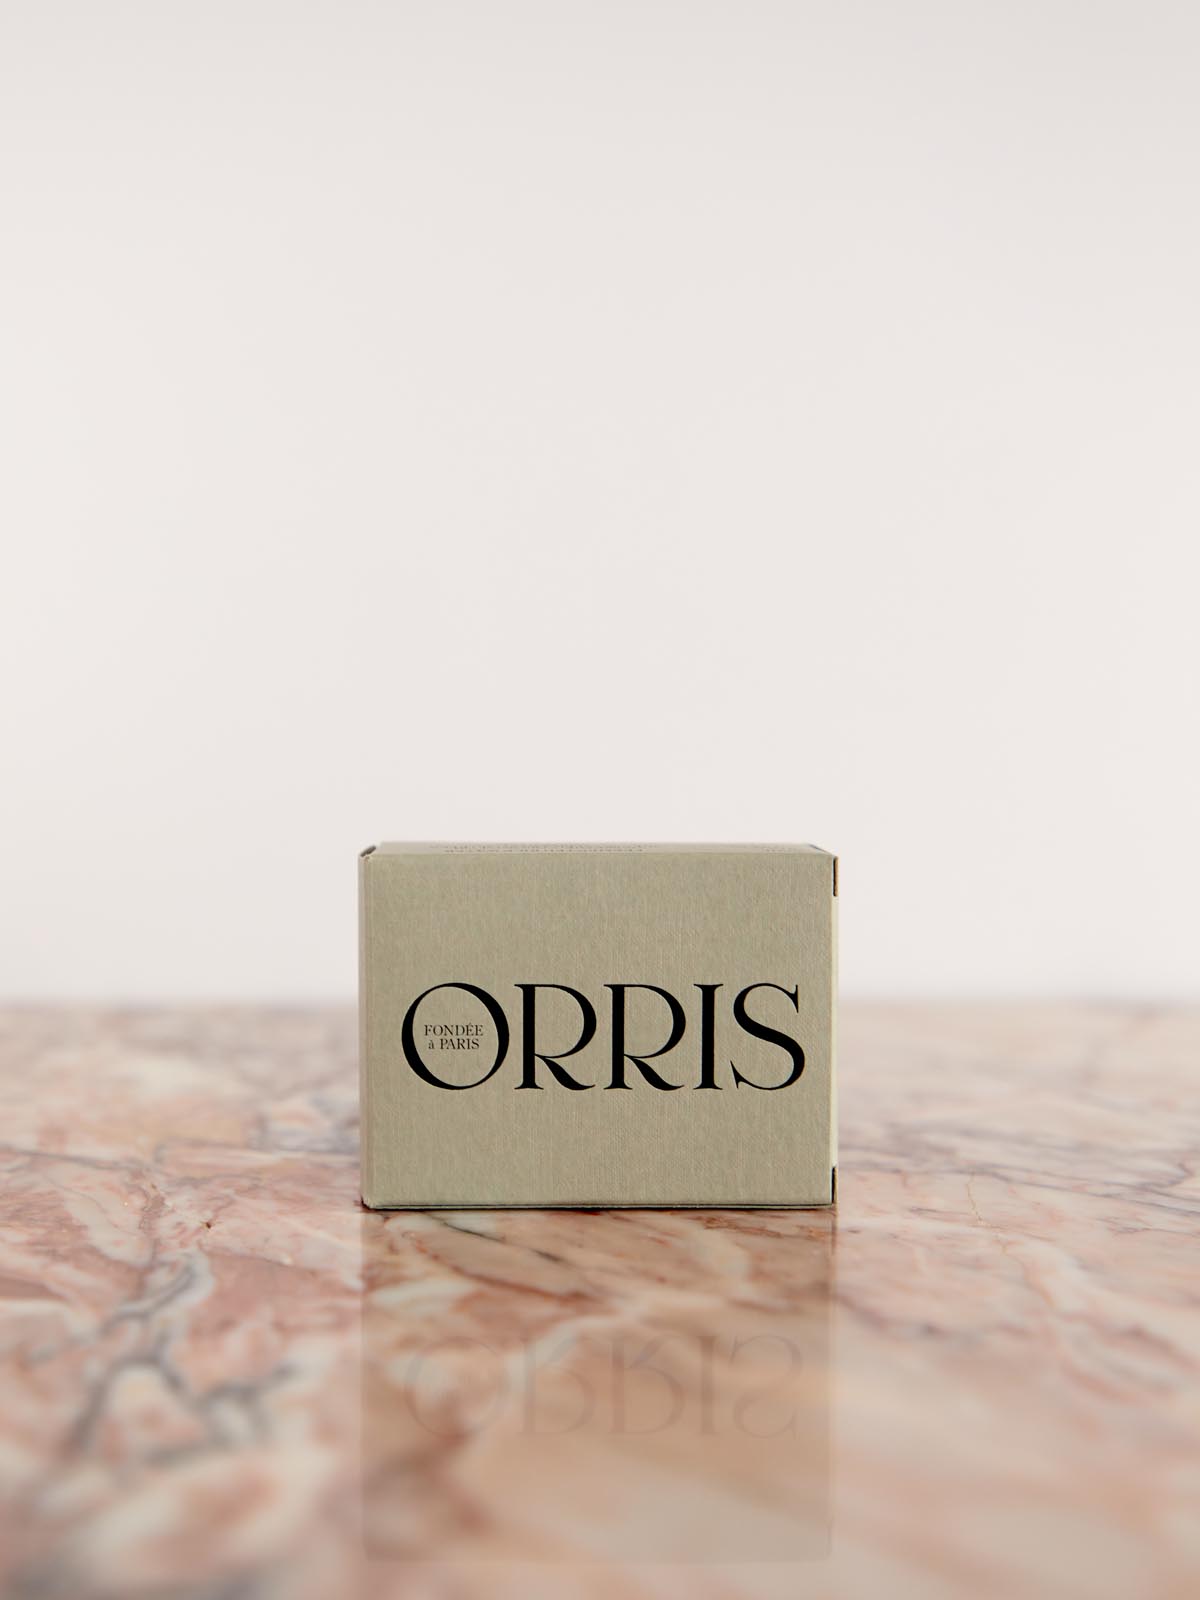 Le Soliste- Cleansing Bar by Orris box on pink marble